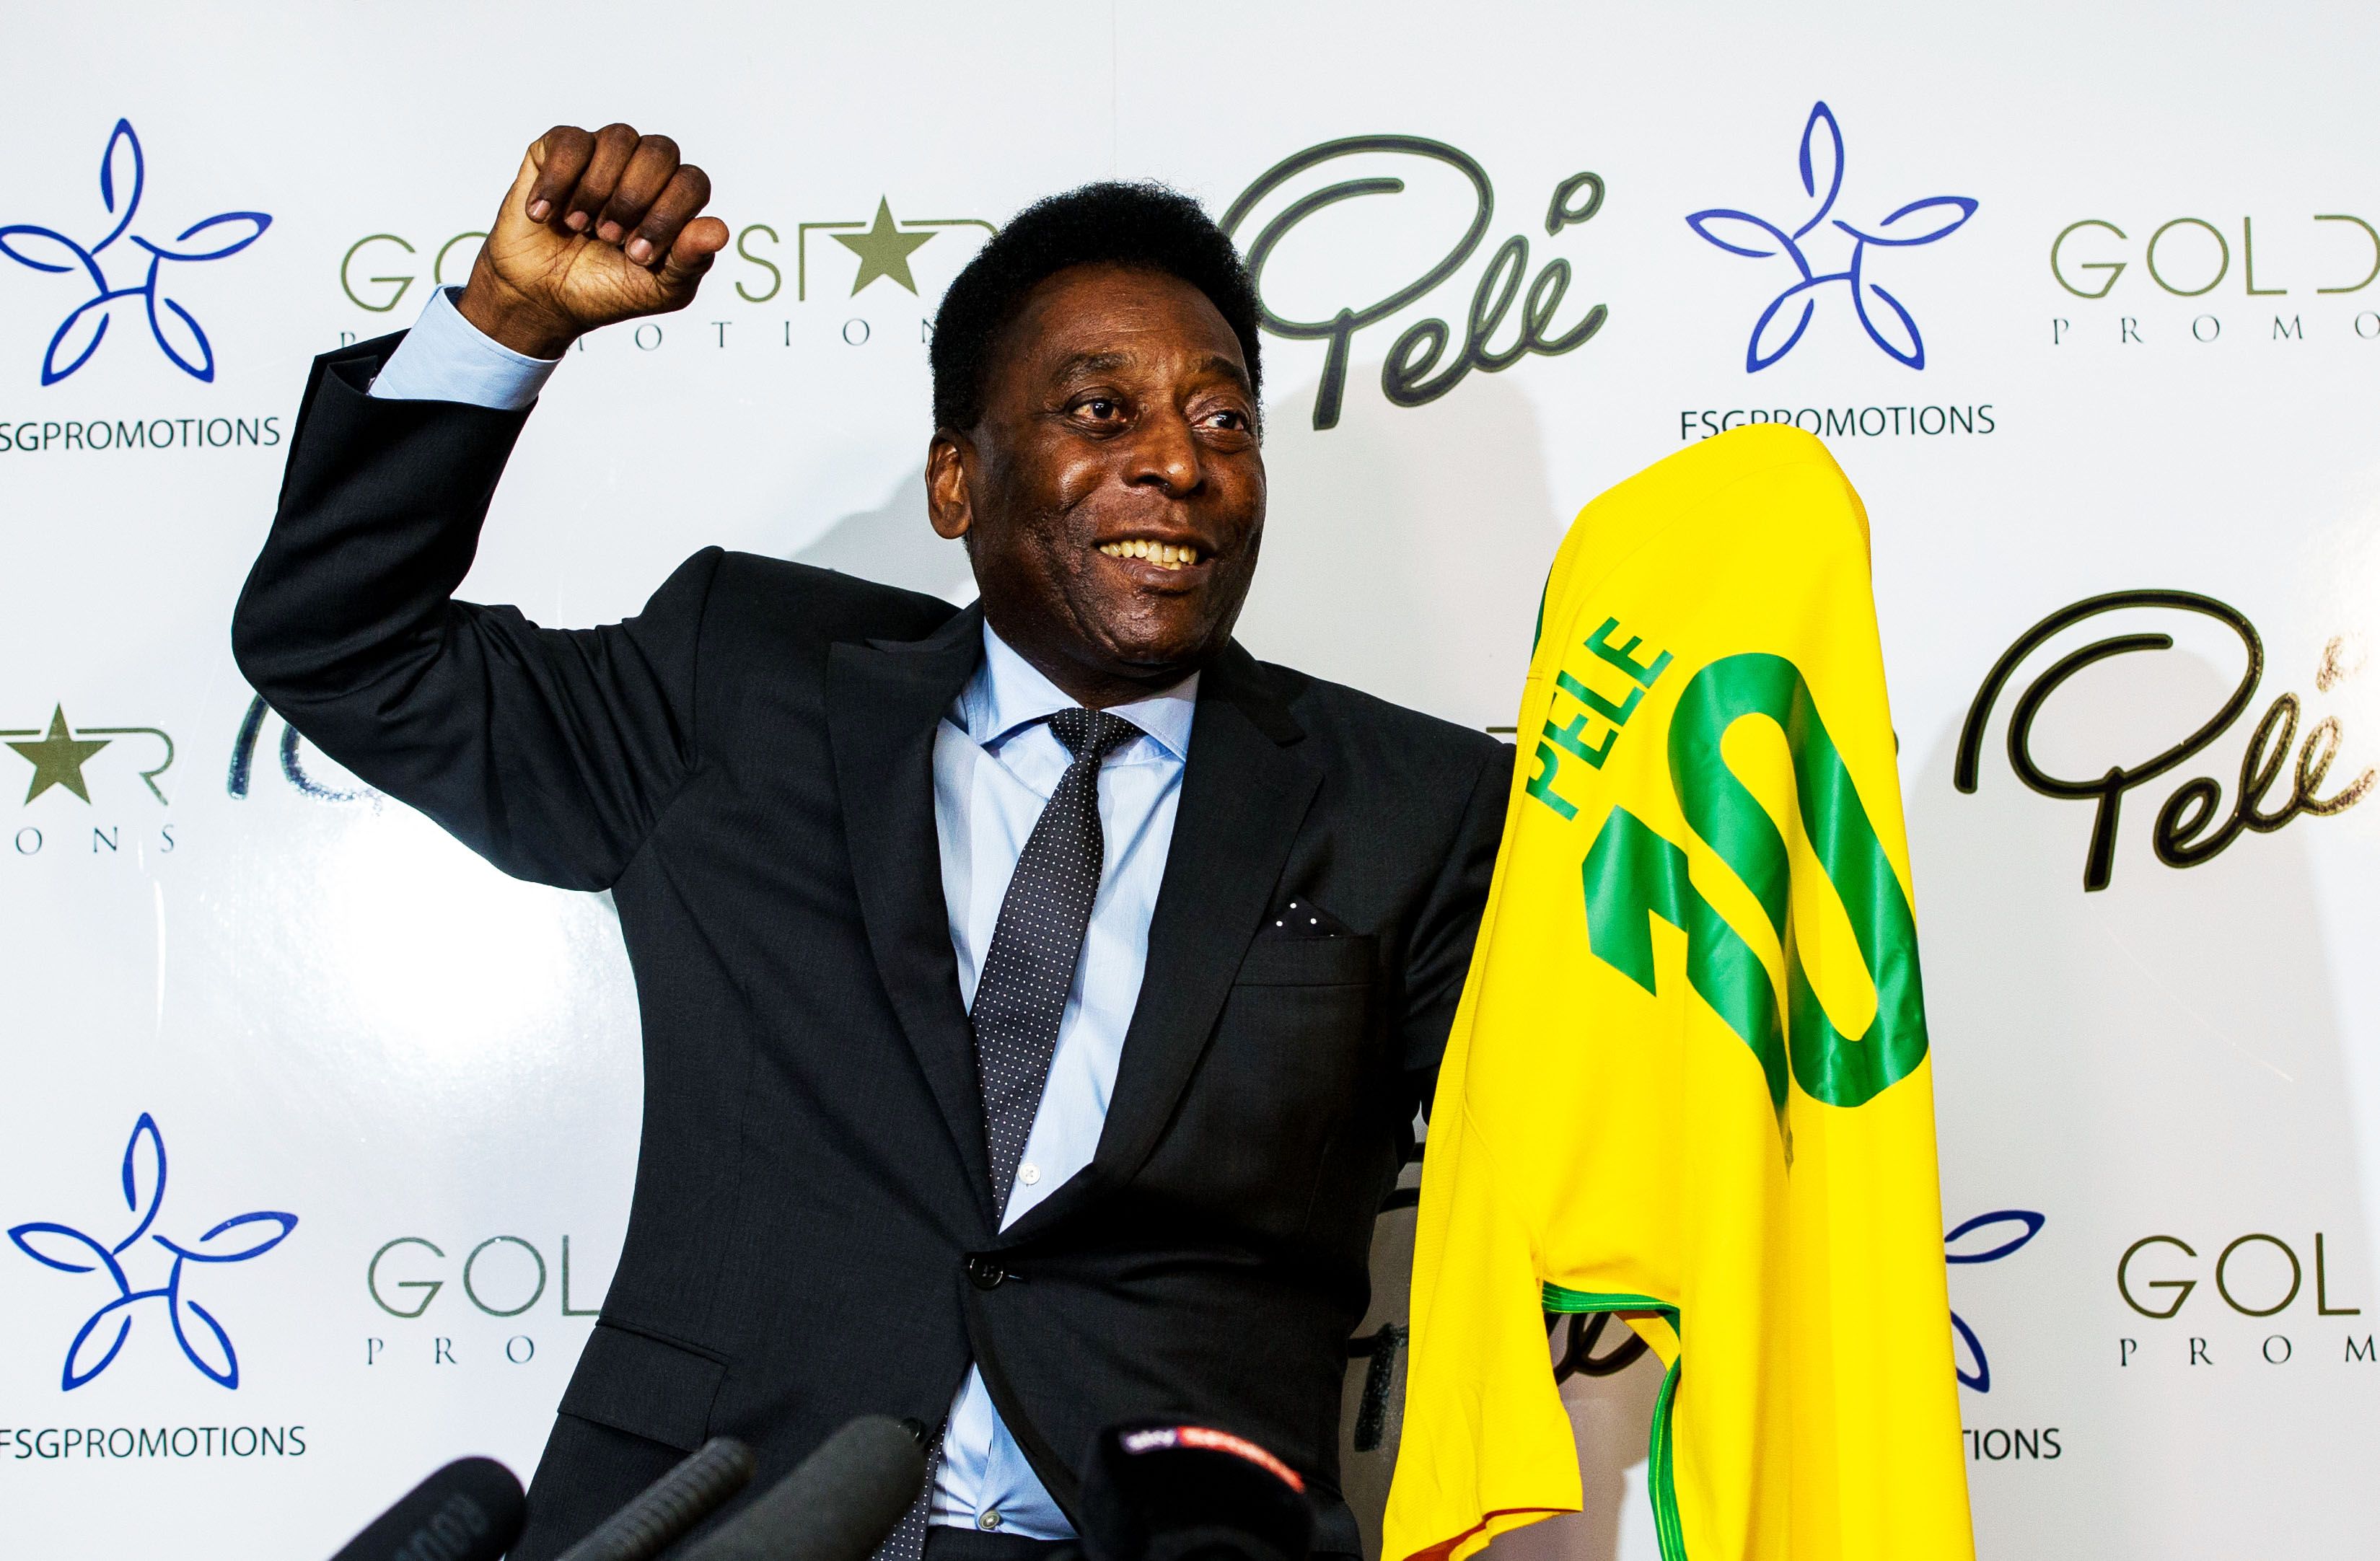 :Pelé in Glasgow in advance of his only Scottish date during his UK tour. (SNS Group)